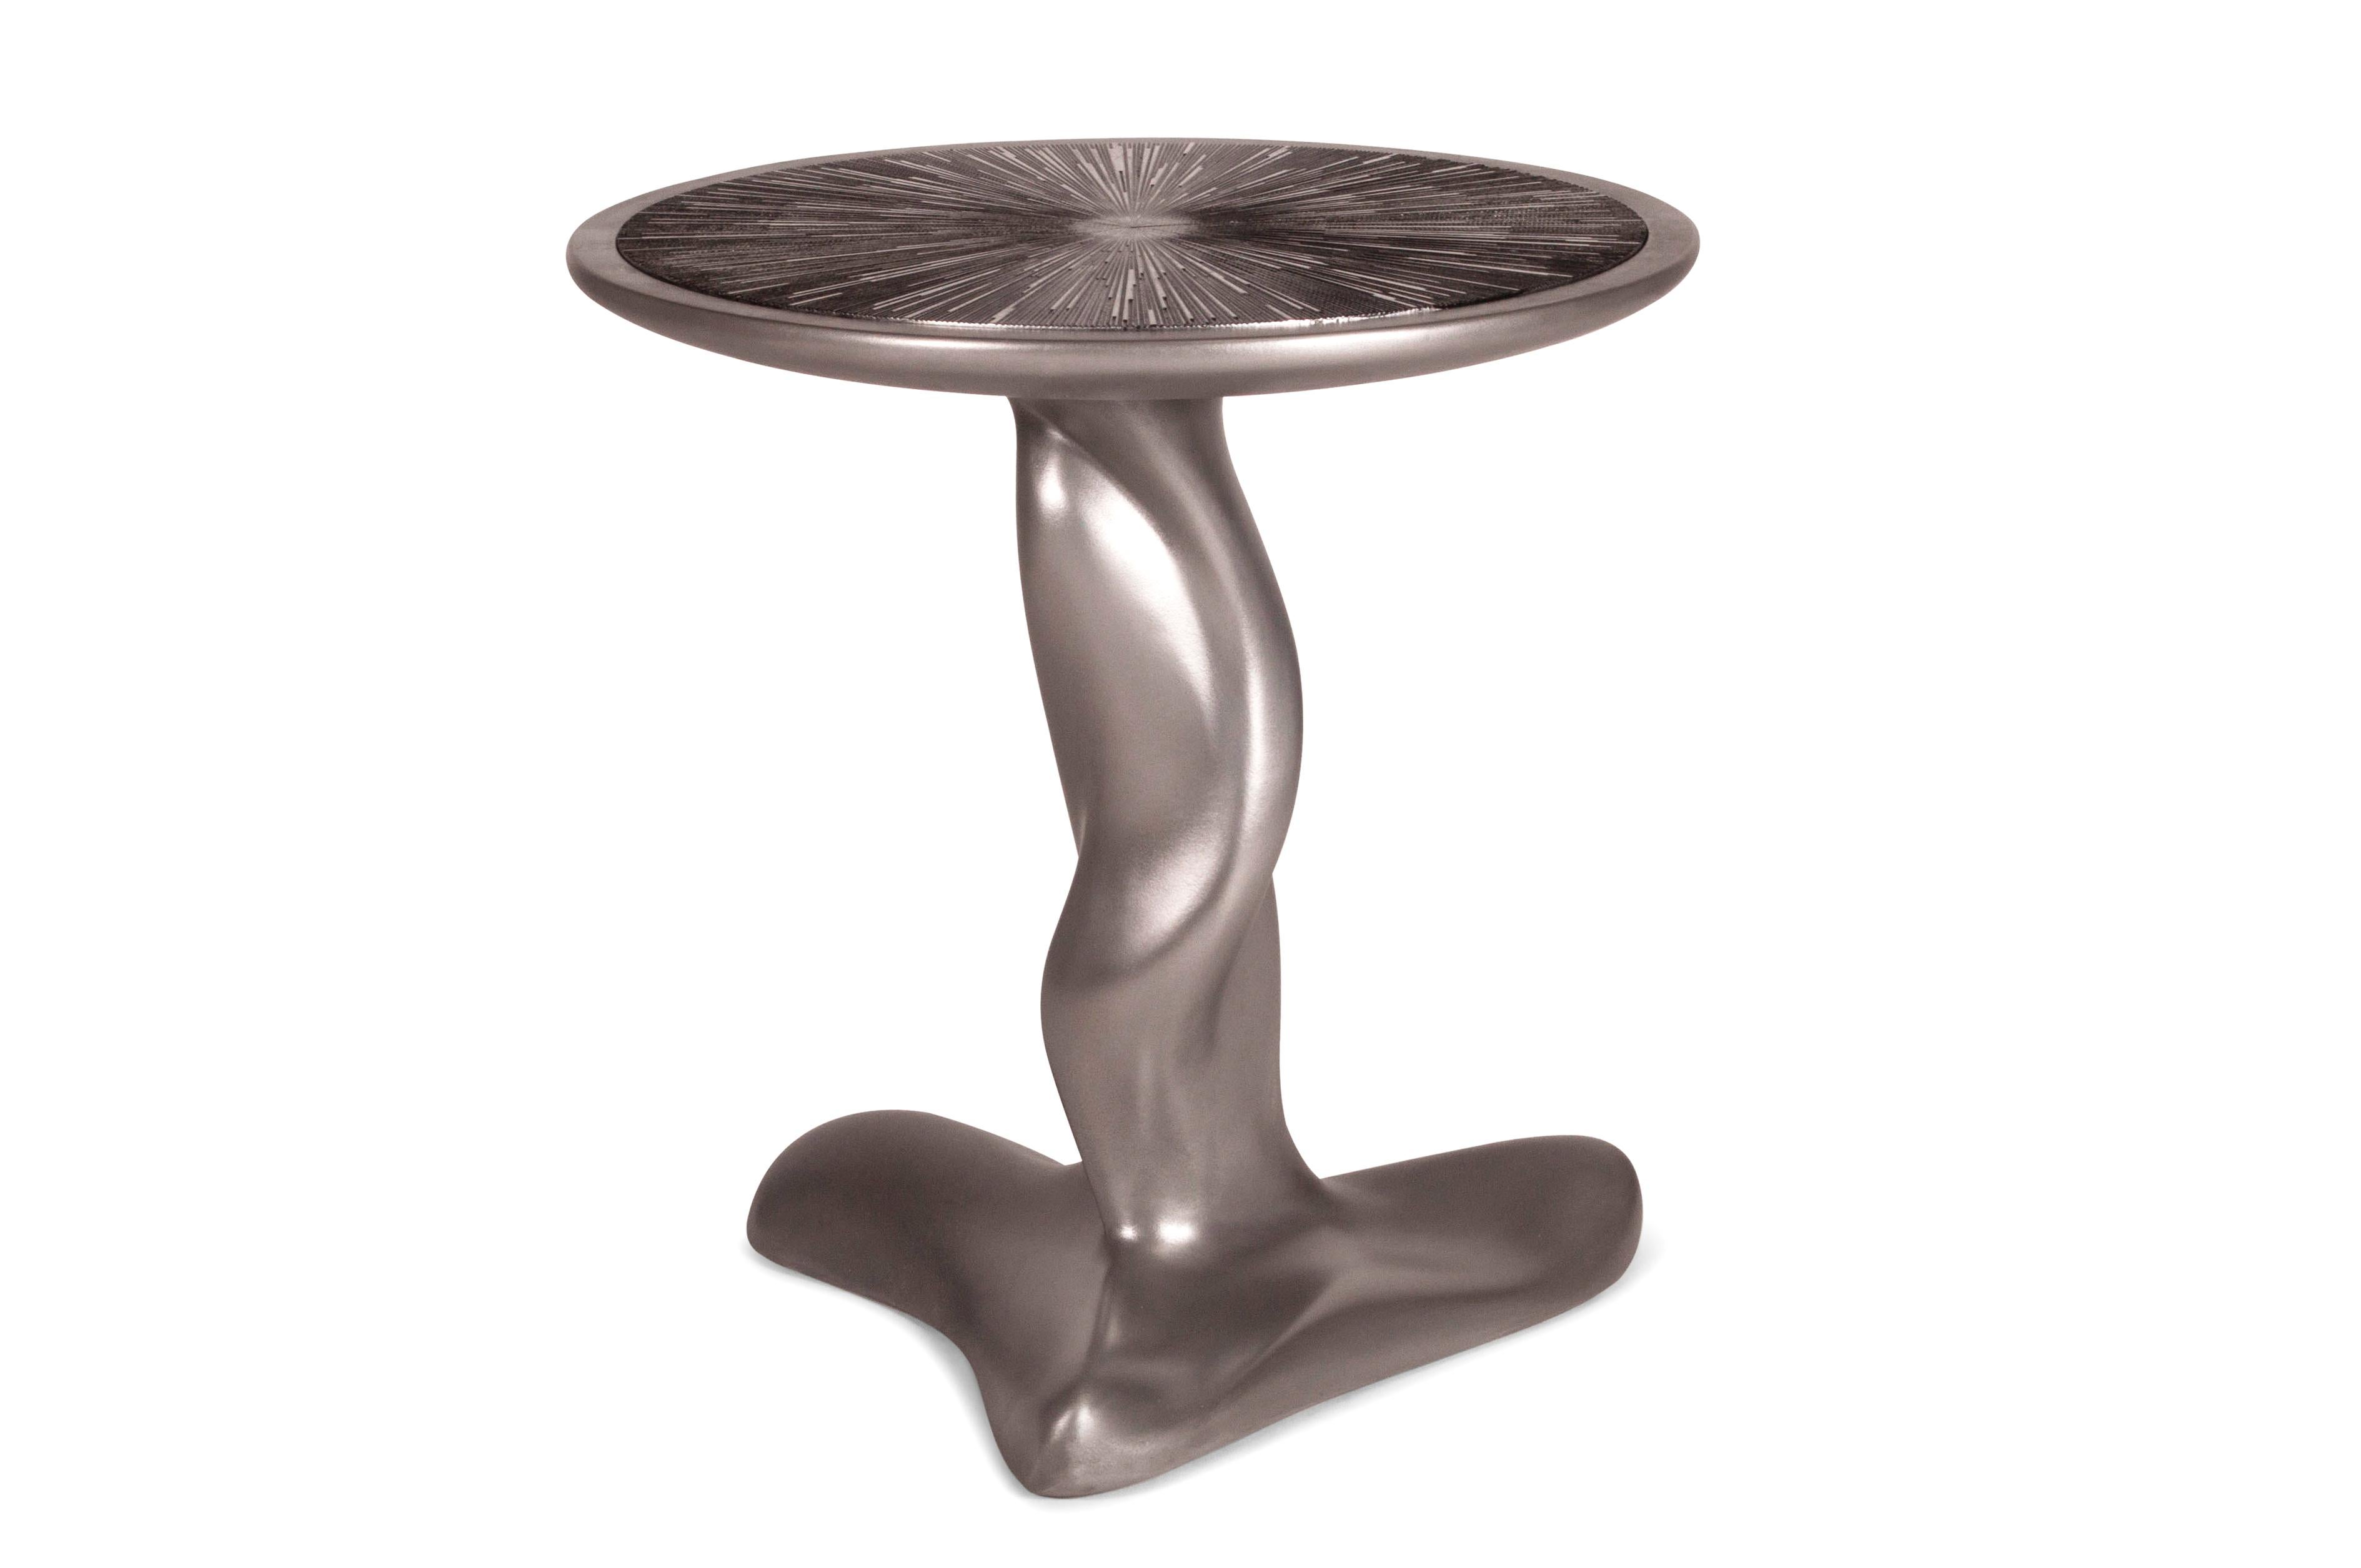 Carved Amorph Helios Side Table, Stainless Steel Finish, with Silver Leaf Top